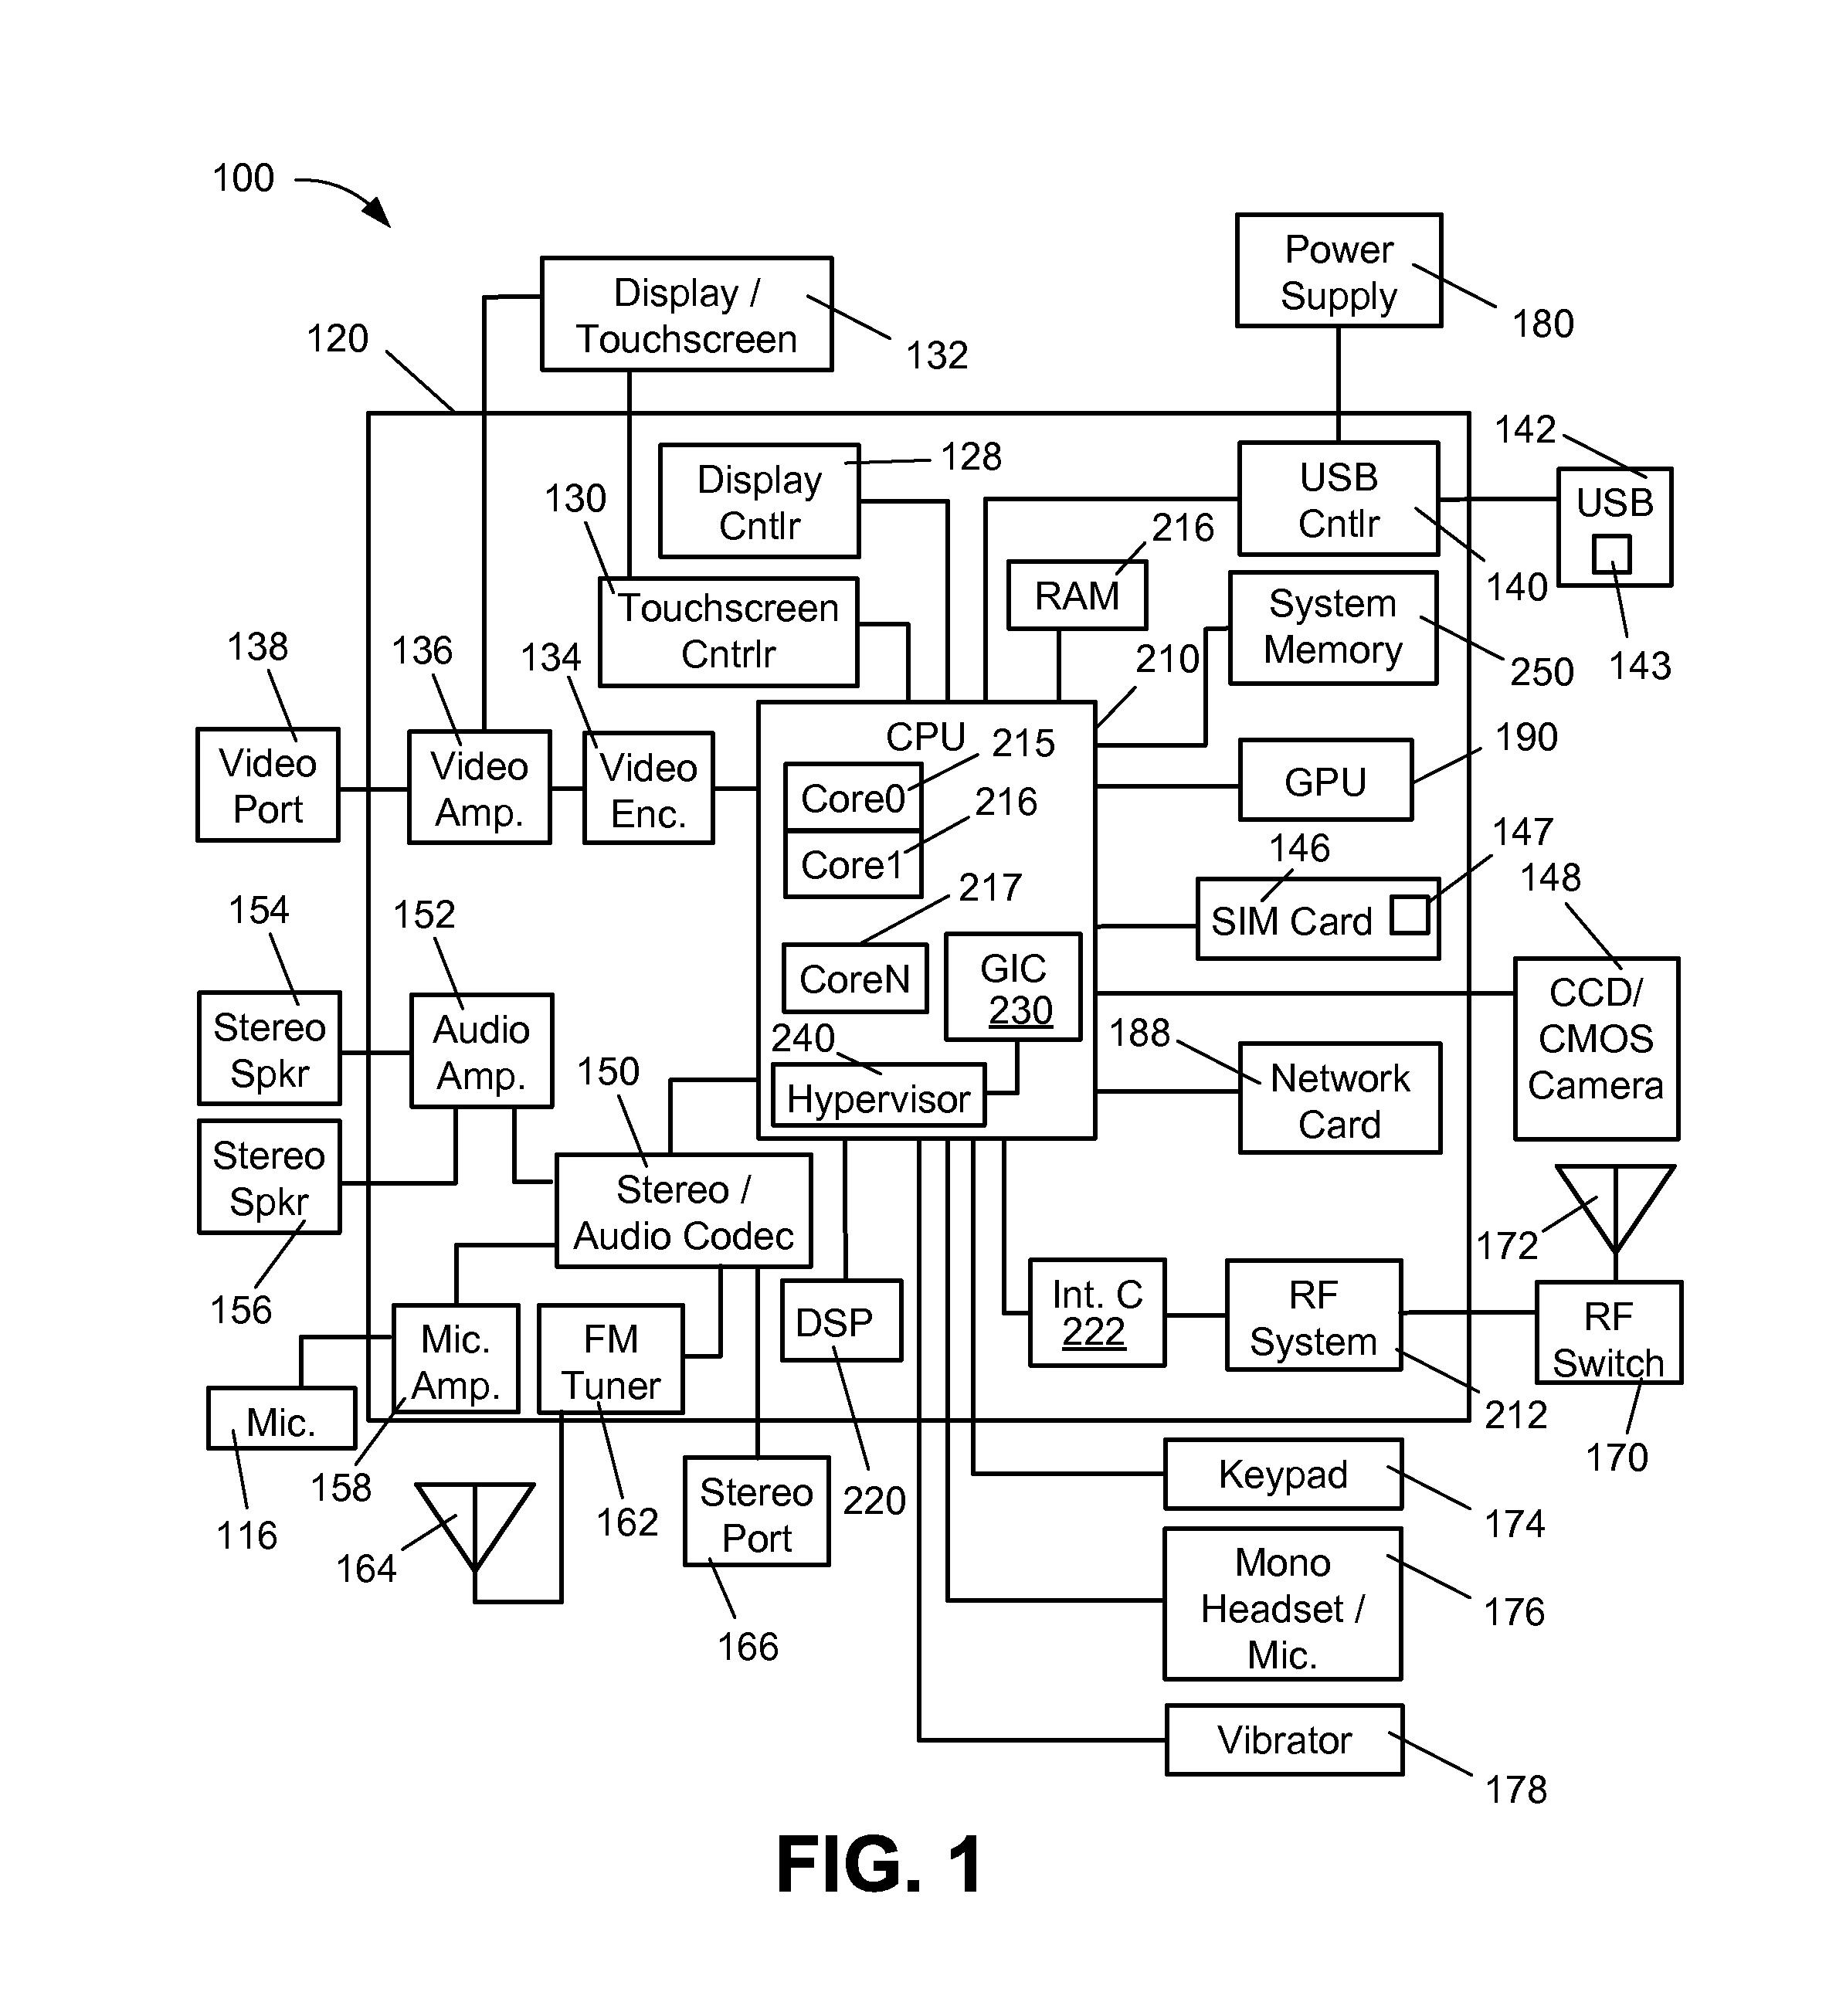 Systems and methods for supporting demand paging for subsystems in a portable computing environment with restricted memory resources